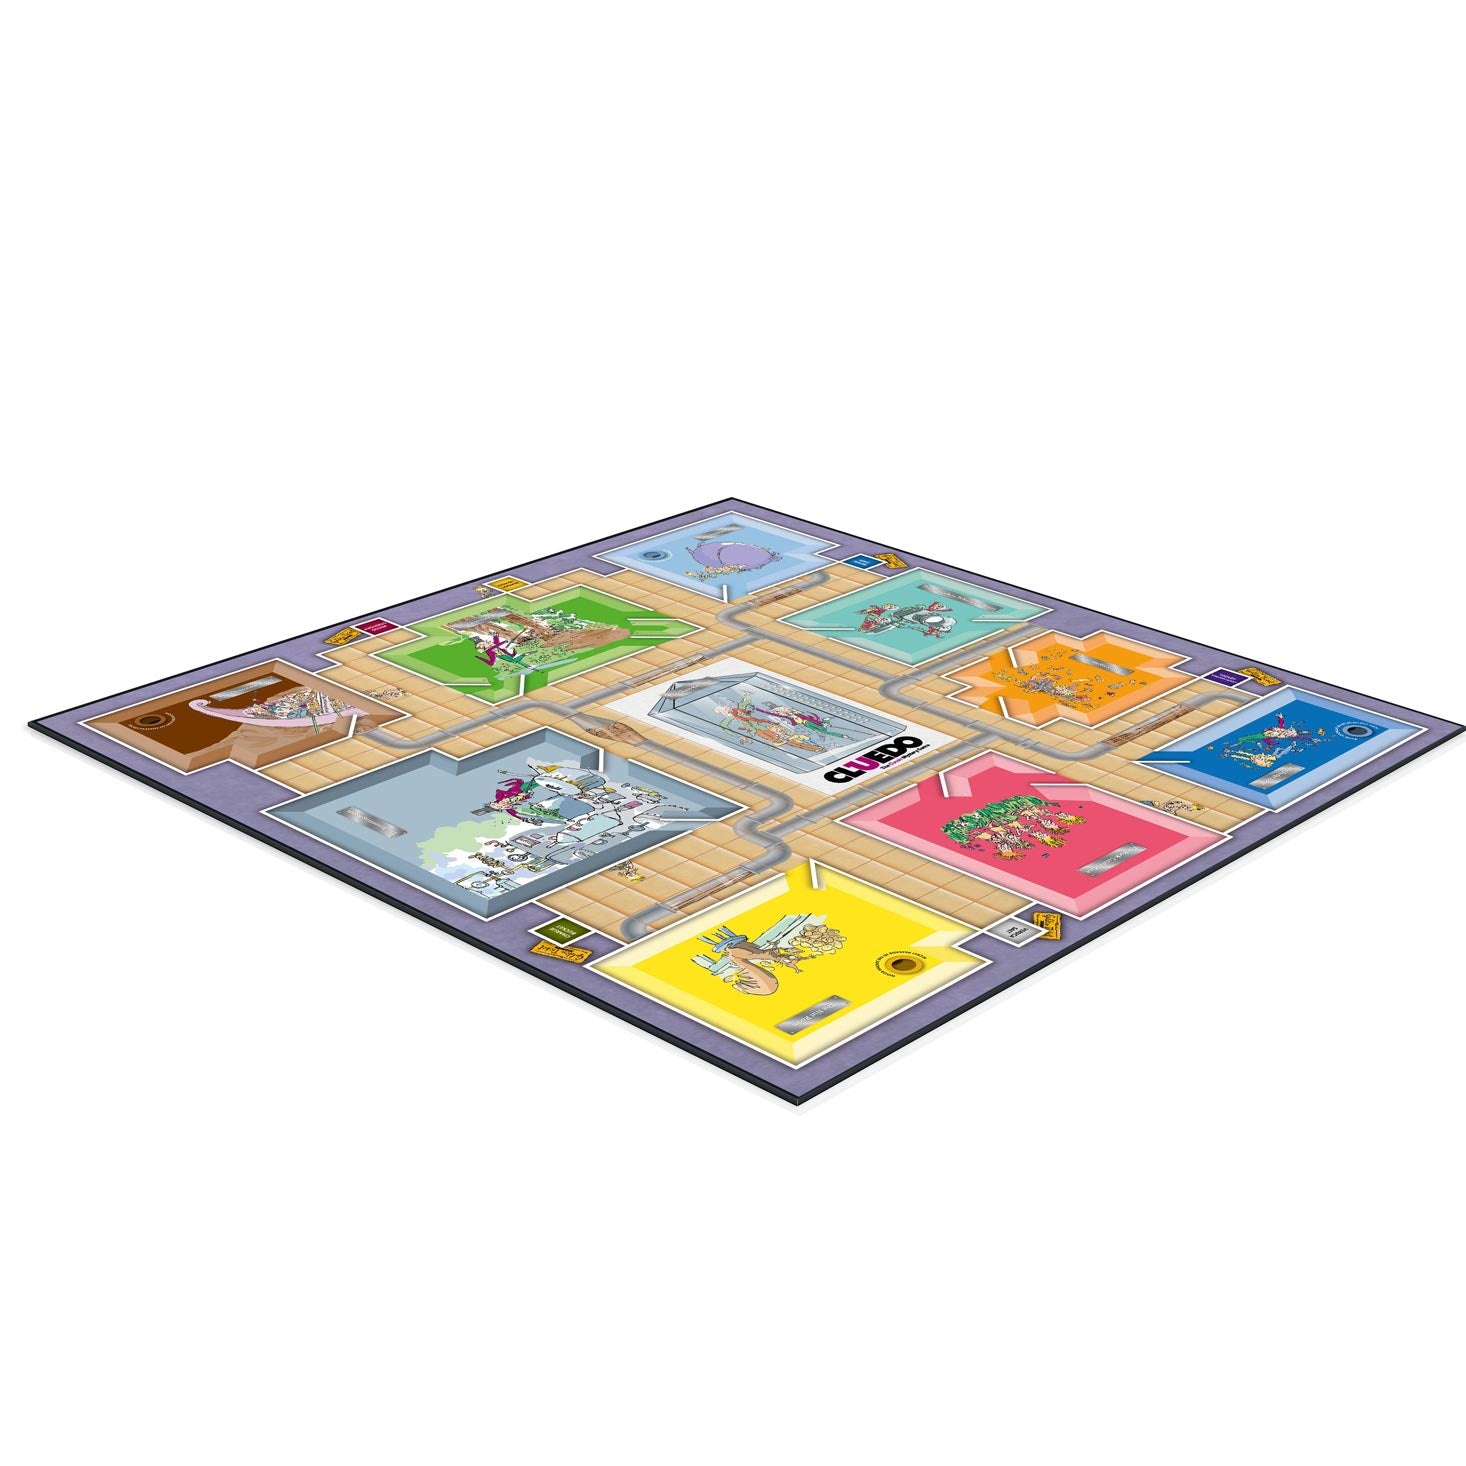 Cluedo board game based on  Charlie and the Chocolate Factory by Roald Dahl and featuring Quentin Blake's illustrations- showing game board